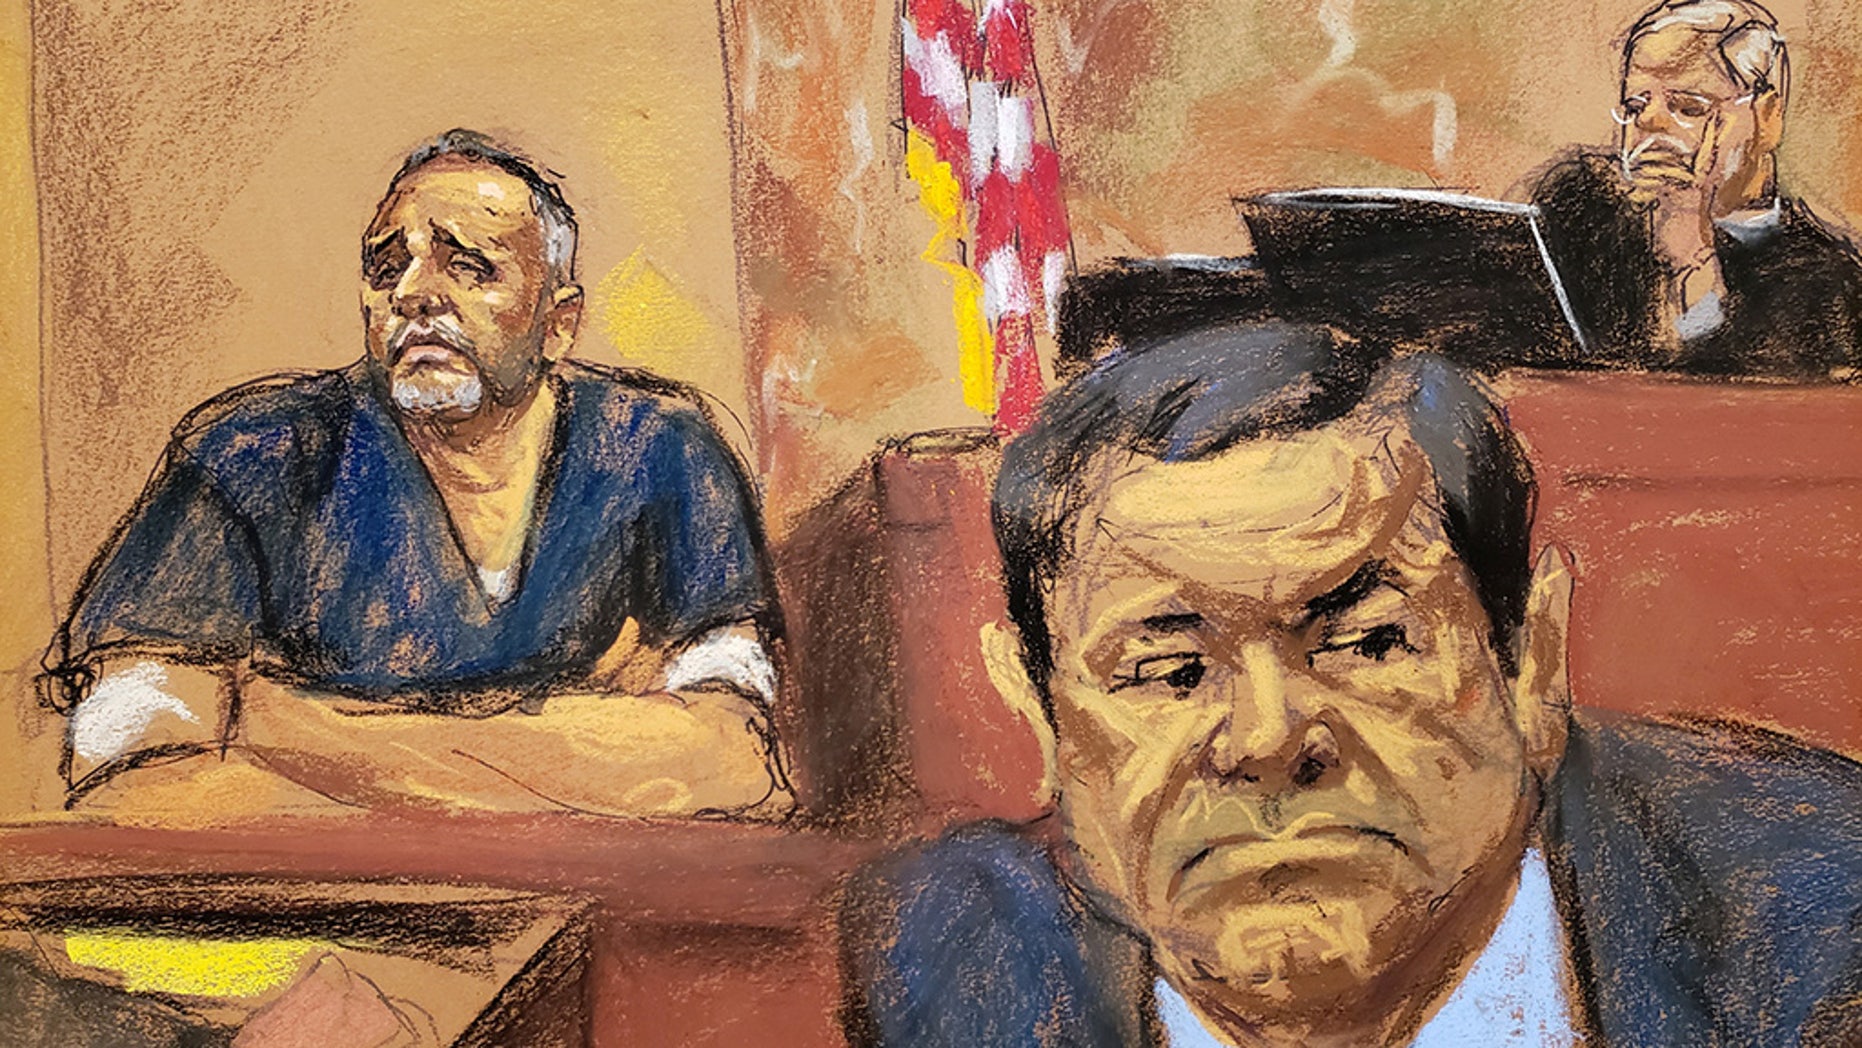 ‘El Chapo’ paid former Mexican president $100M bribe, court witness claims